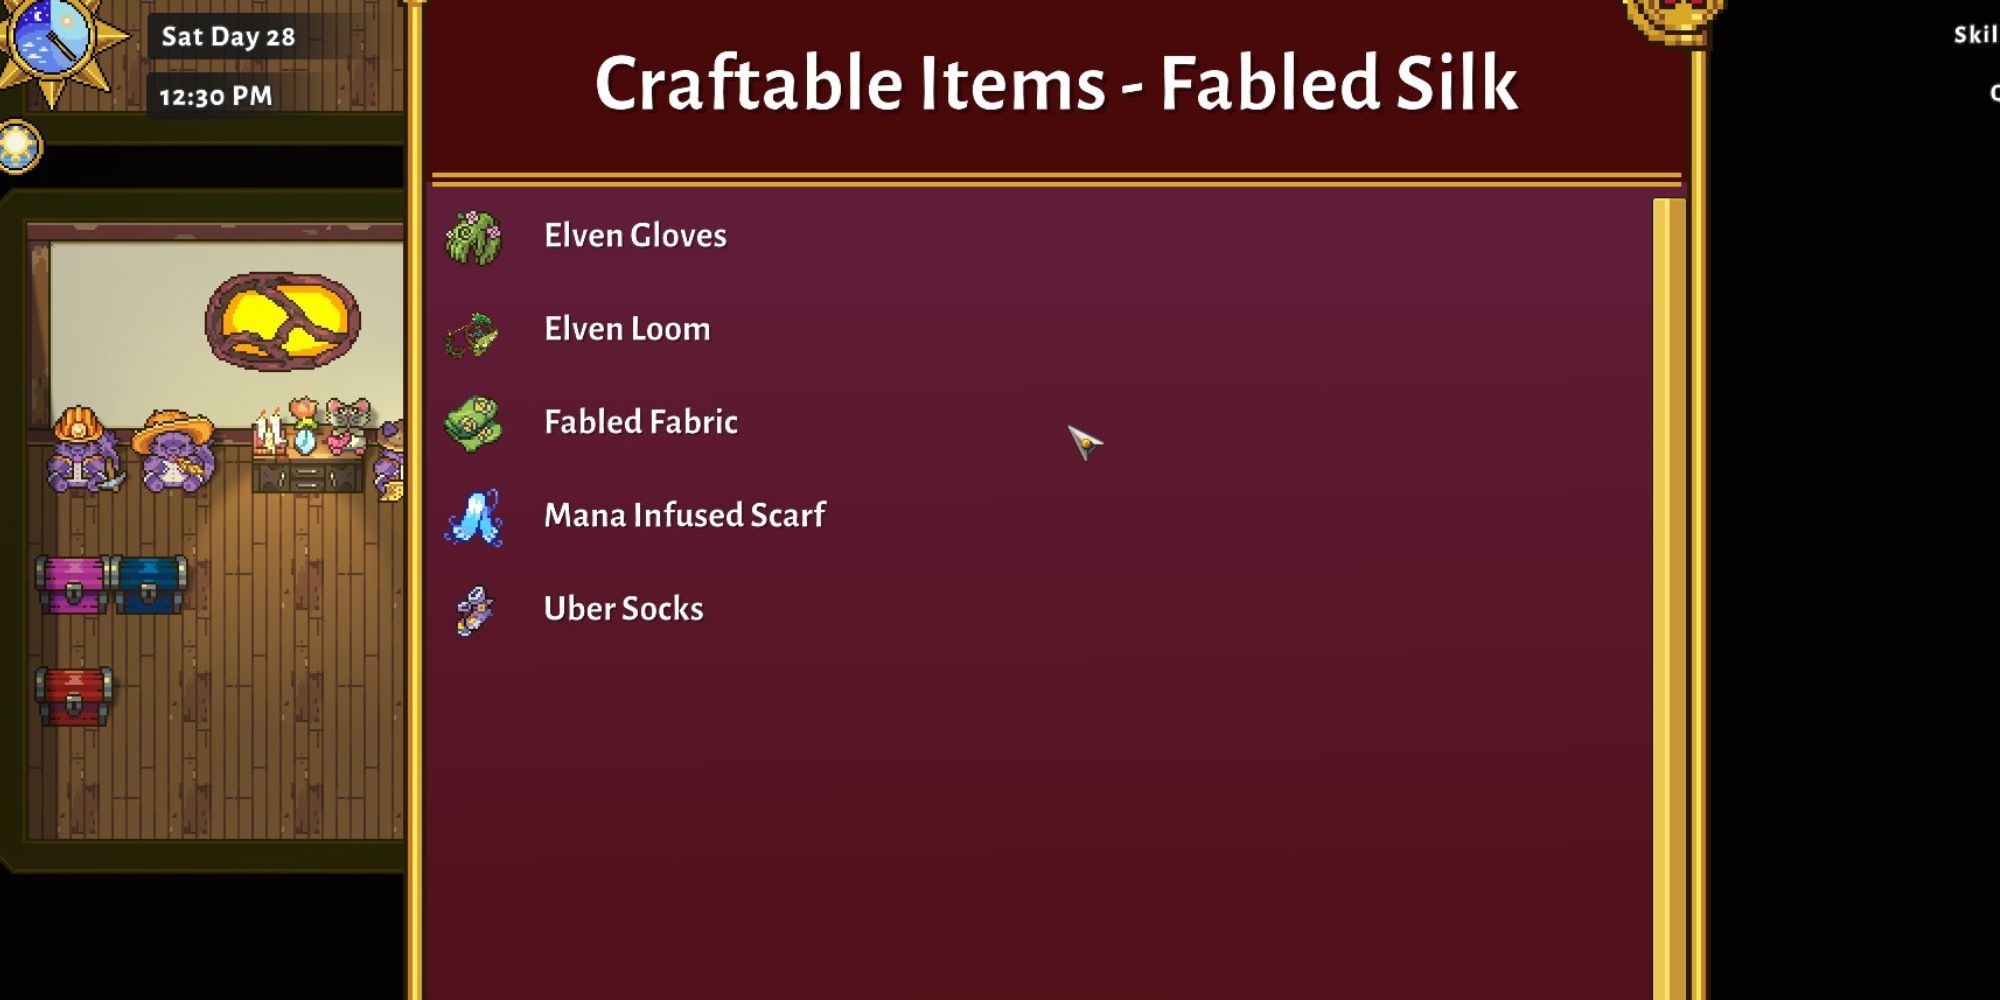 The Crafting Recipes menu shows what items can be crafted from the Legendary Silk of Sunhaven.